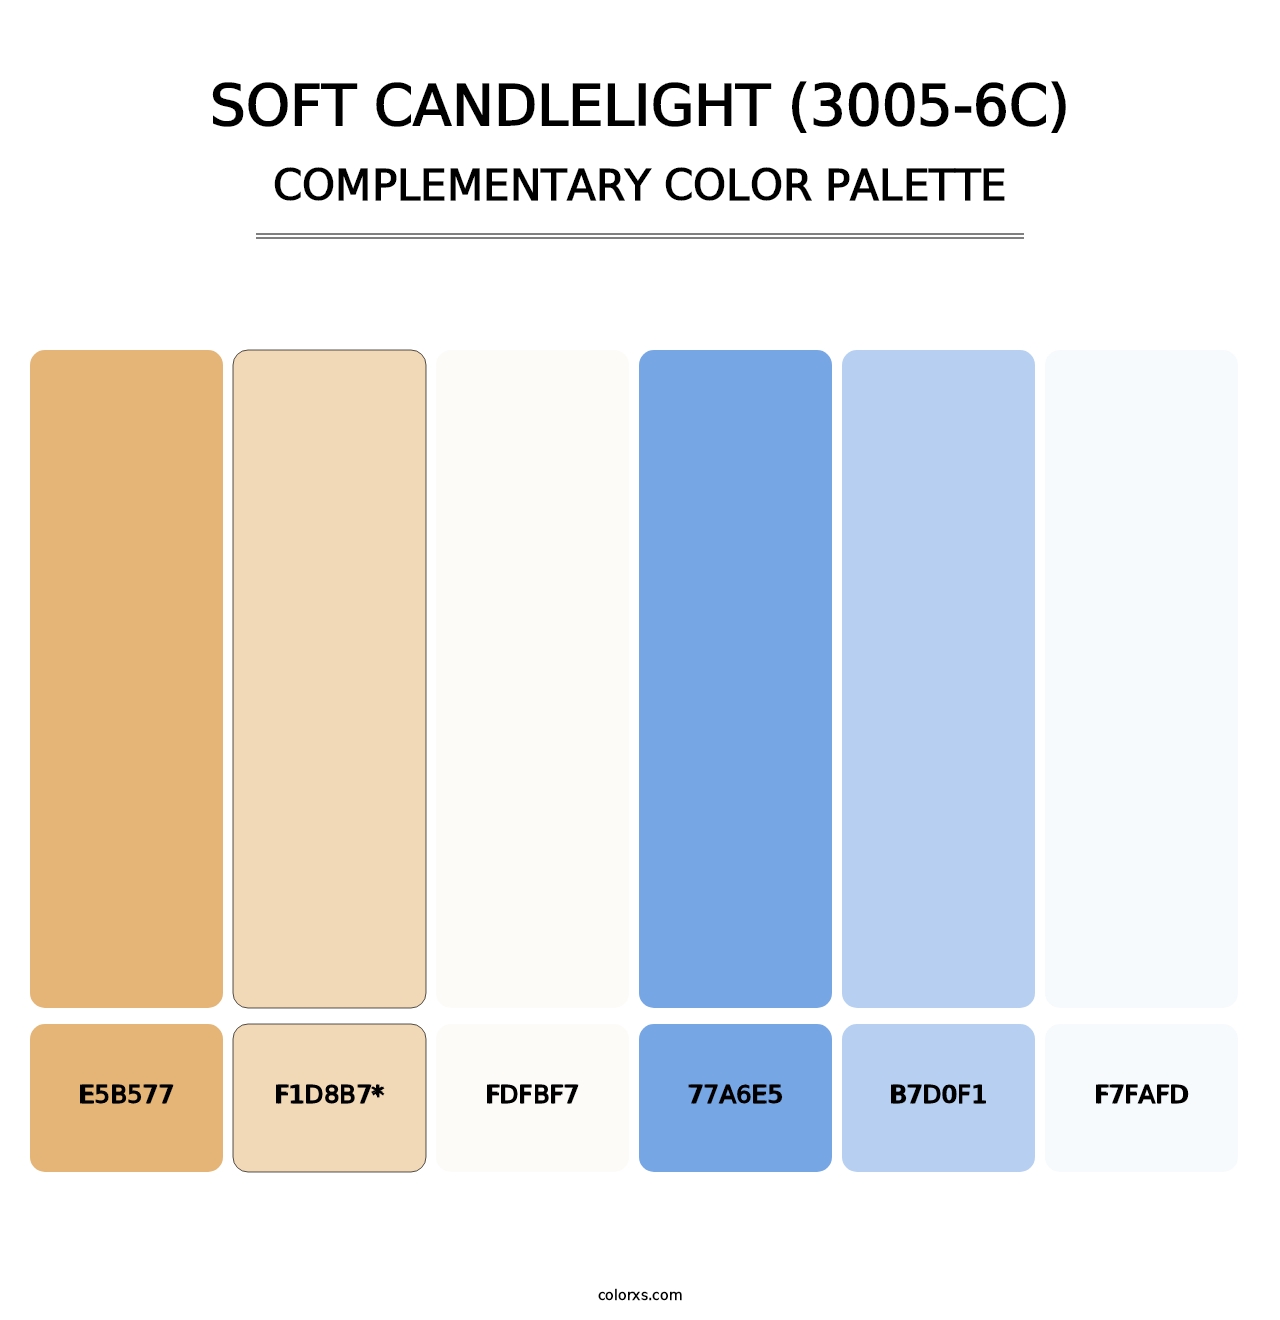 Soft Candlelight (3005-6C) - Complementary Color Palette